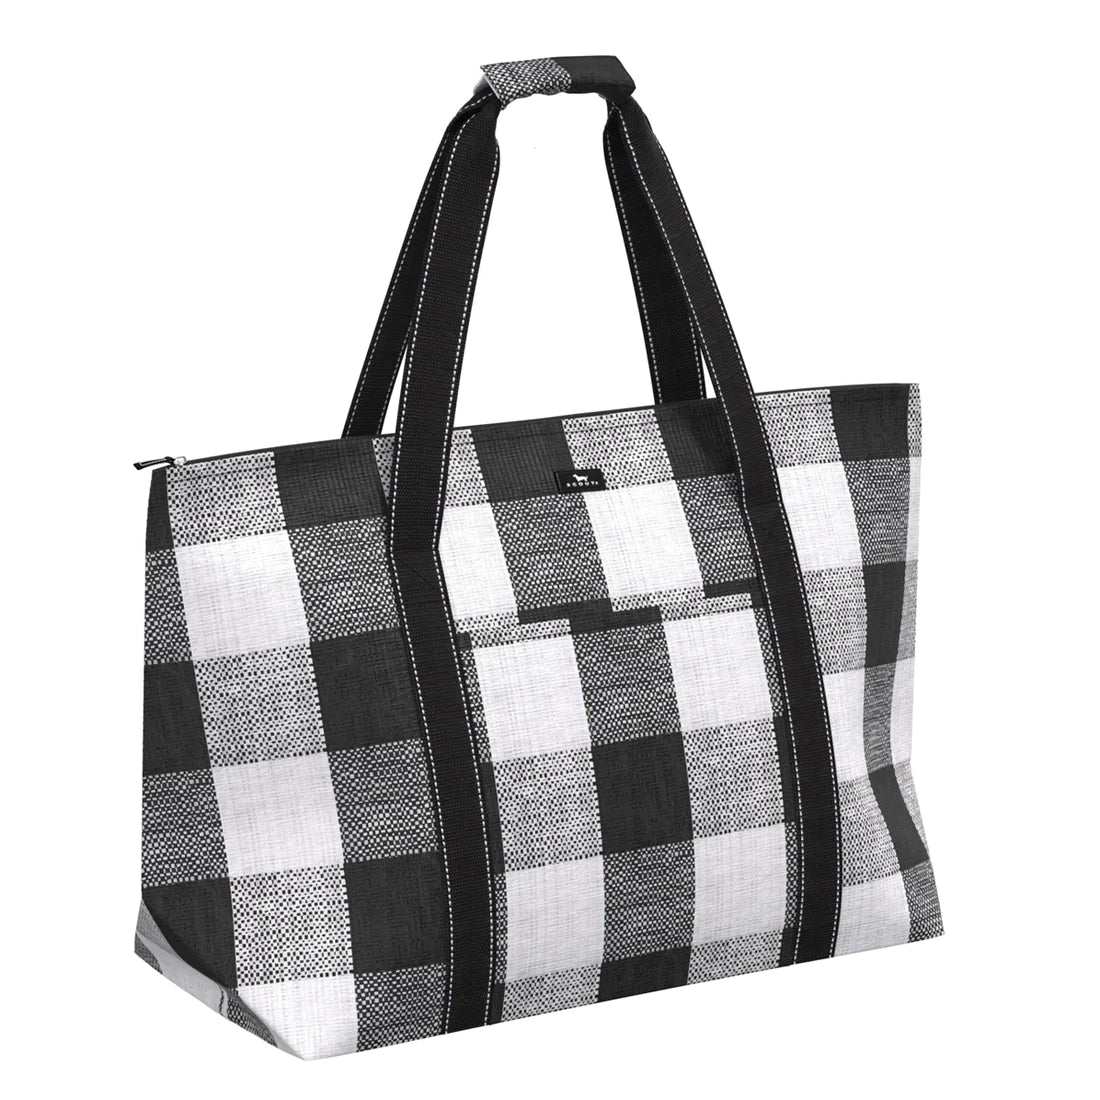 Scout On Holiday Travel Bag - Black/White Check